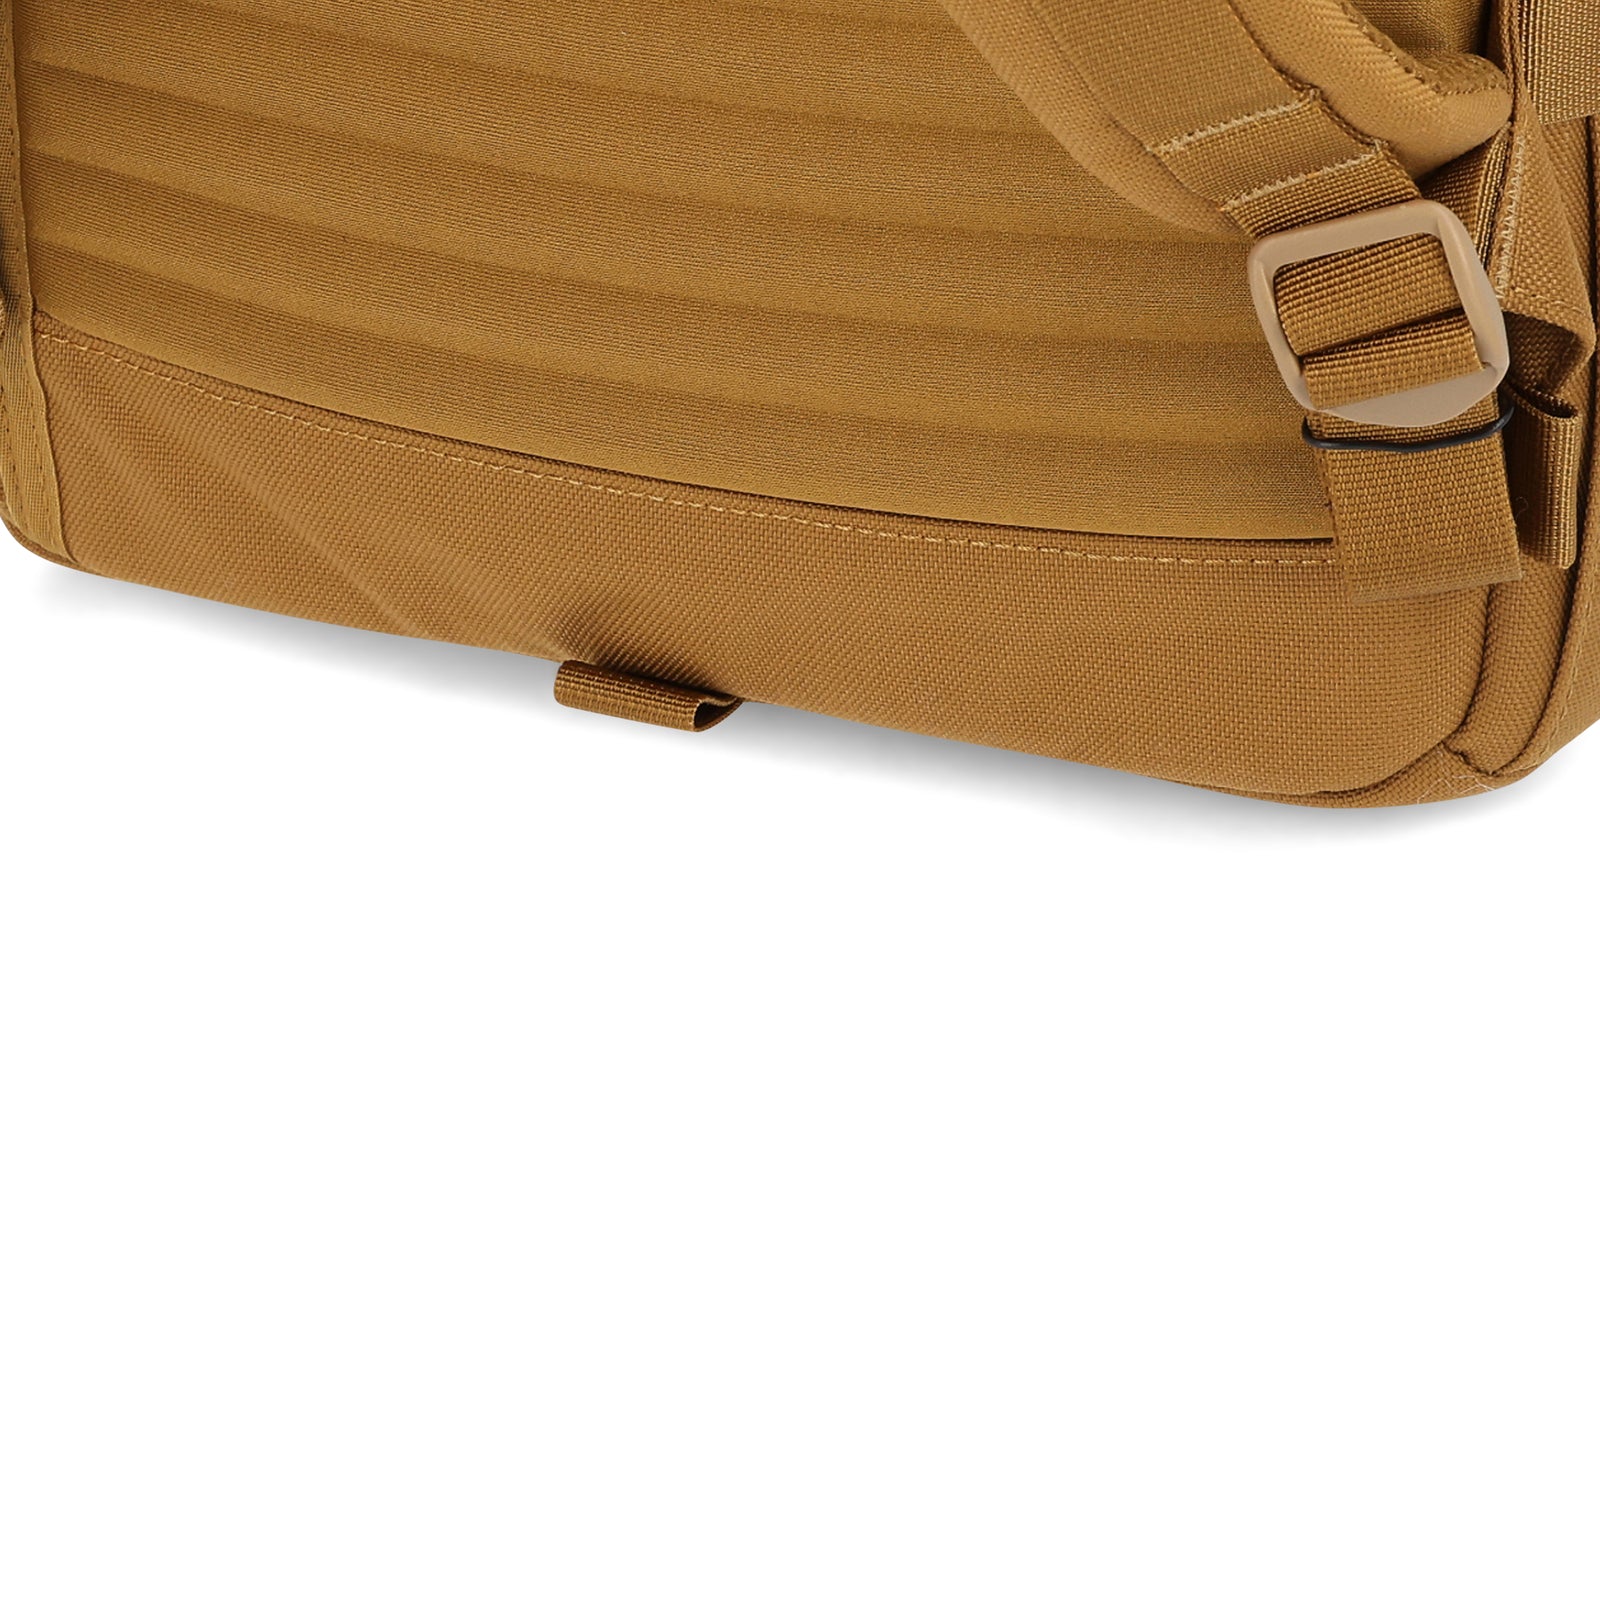 General detail Shot of the Topo Designs Rover Pack Tech in "Dark Khaki" brown showing bottom attachment point.